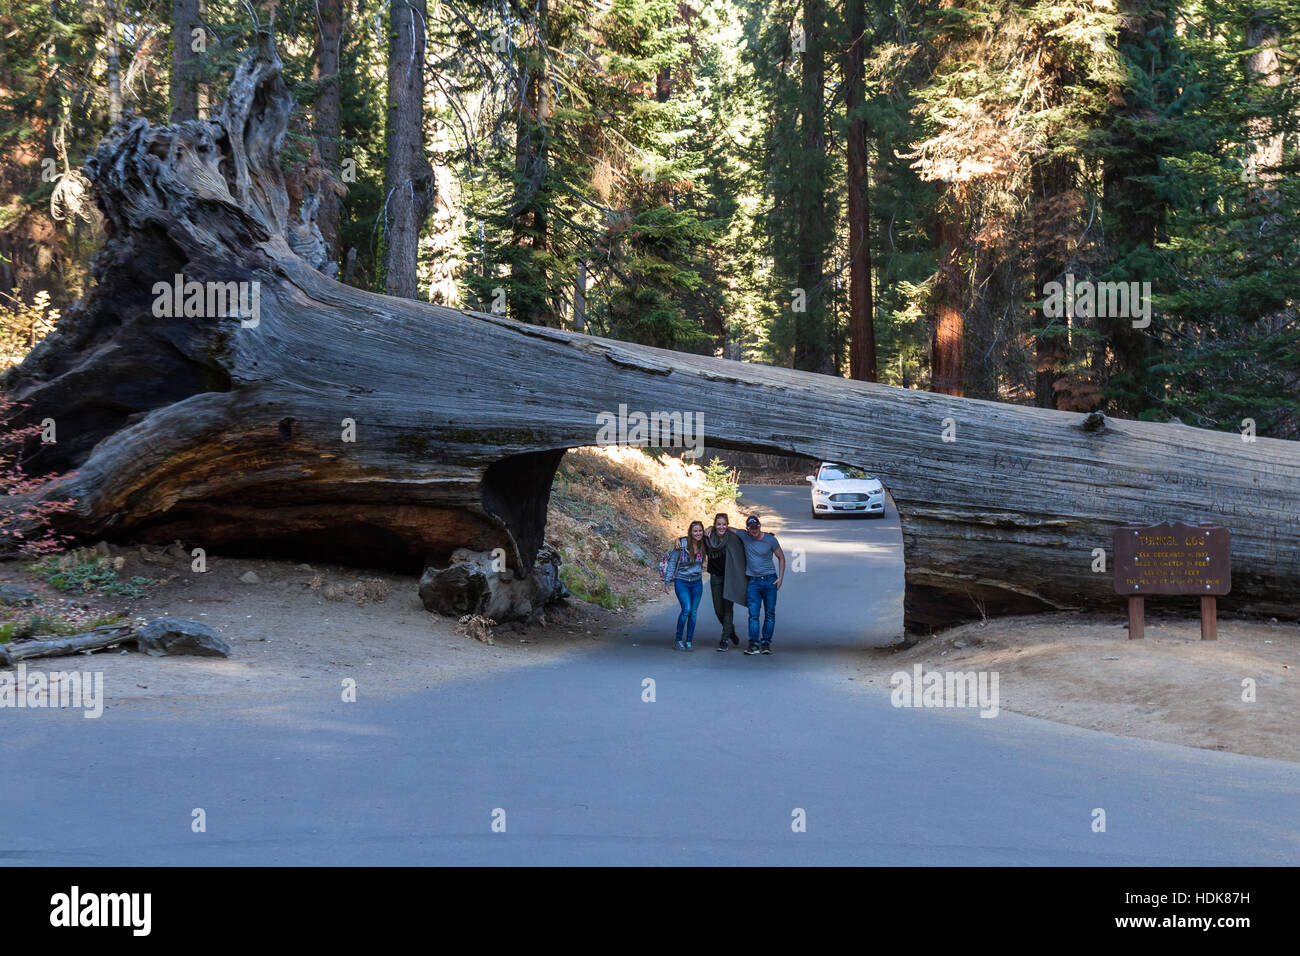 Sequoia NP, California - November 14: People posing for a picture under tunnel log. November 14 2016, Sequoia NP, California. Stock Photo